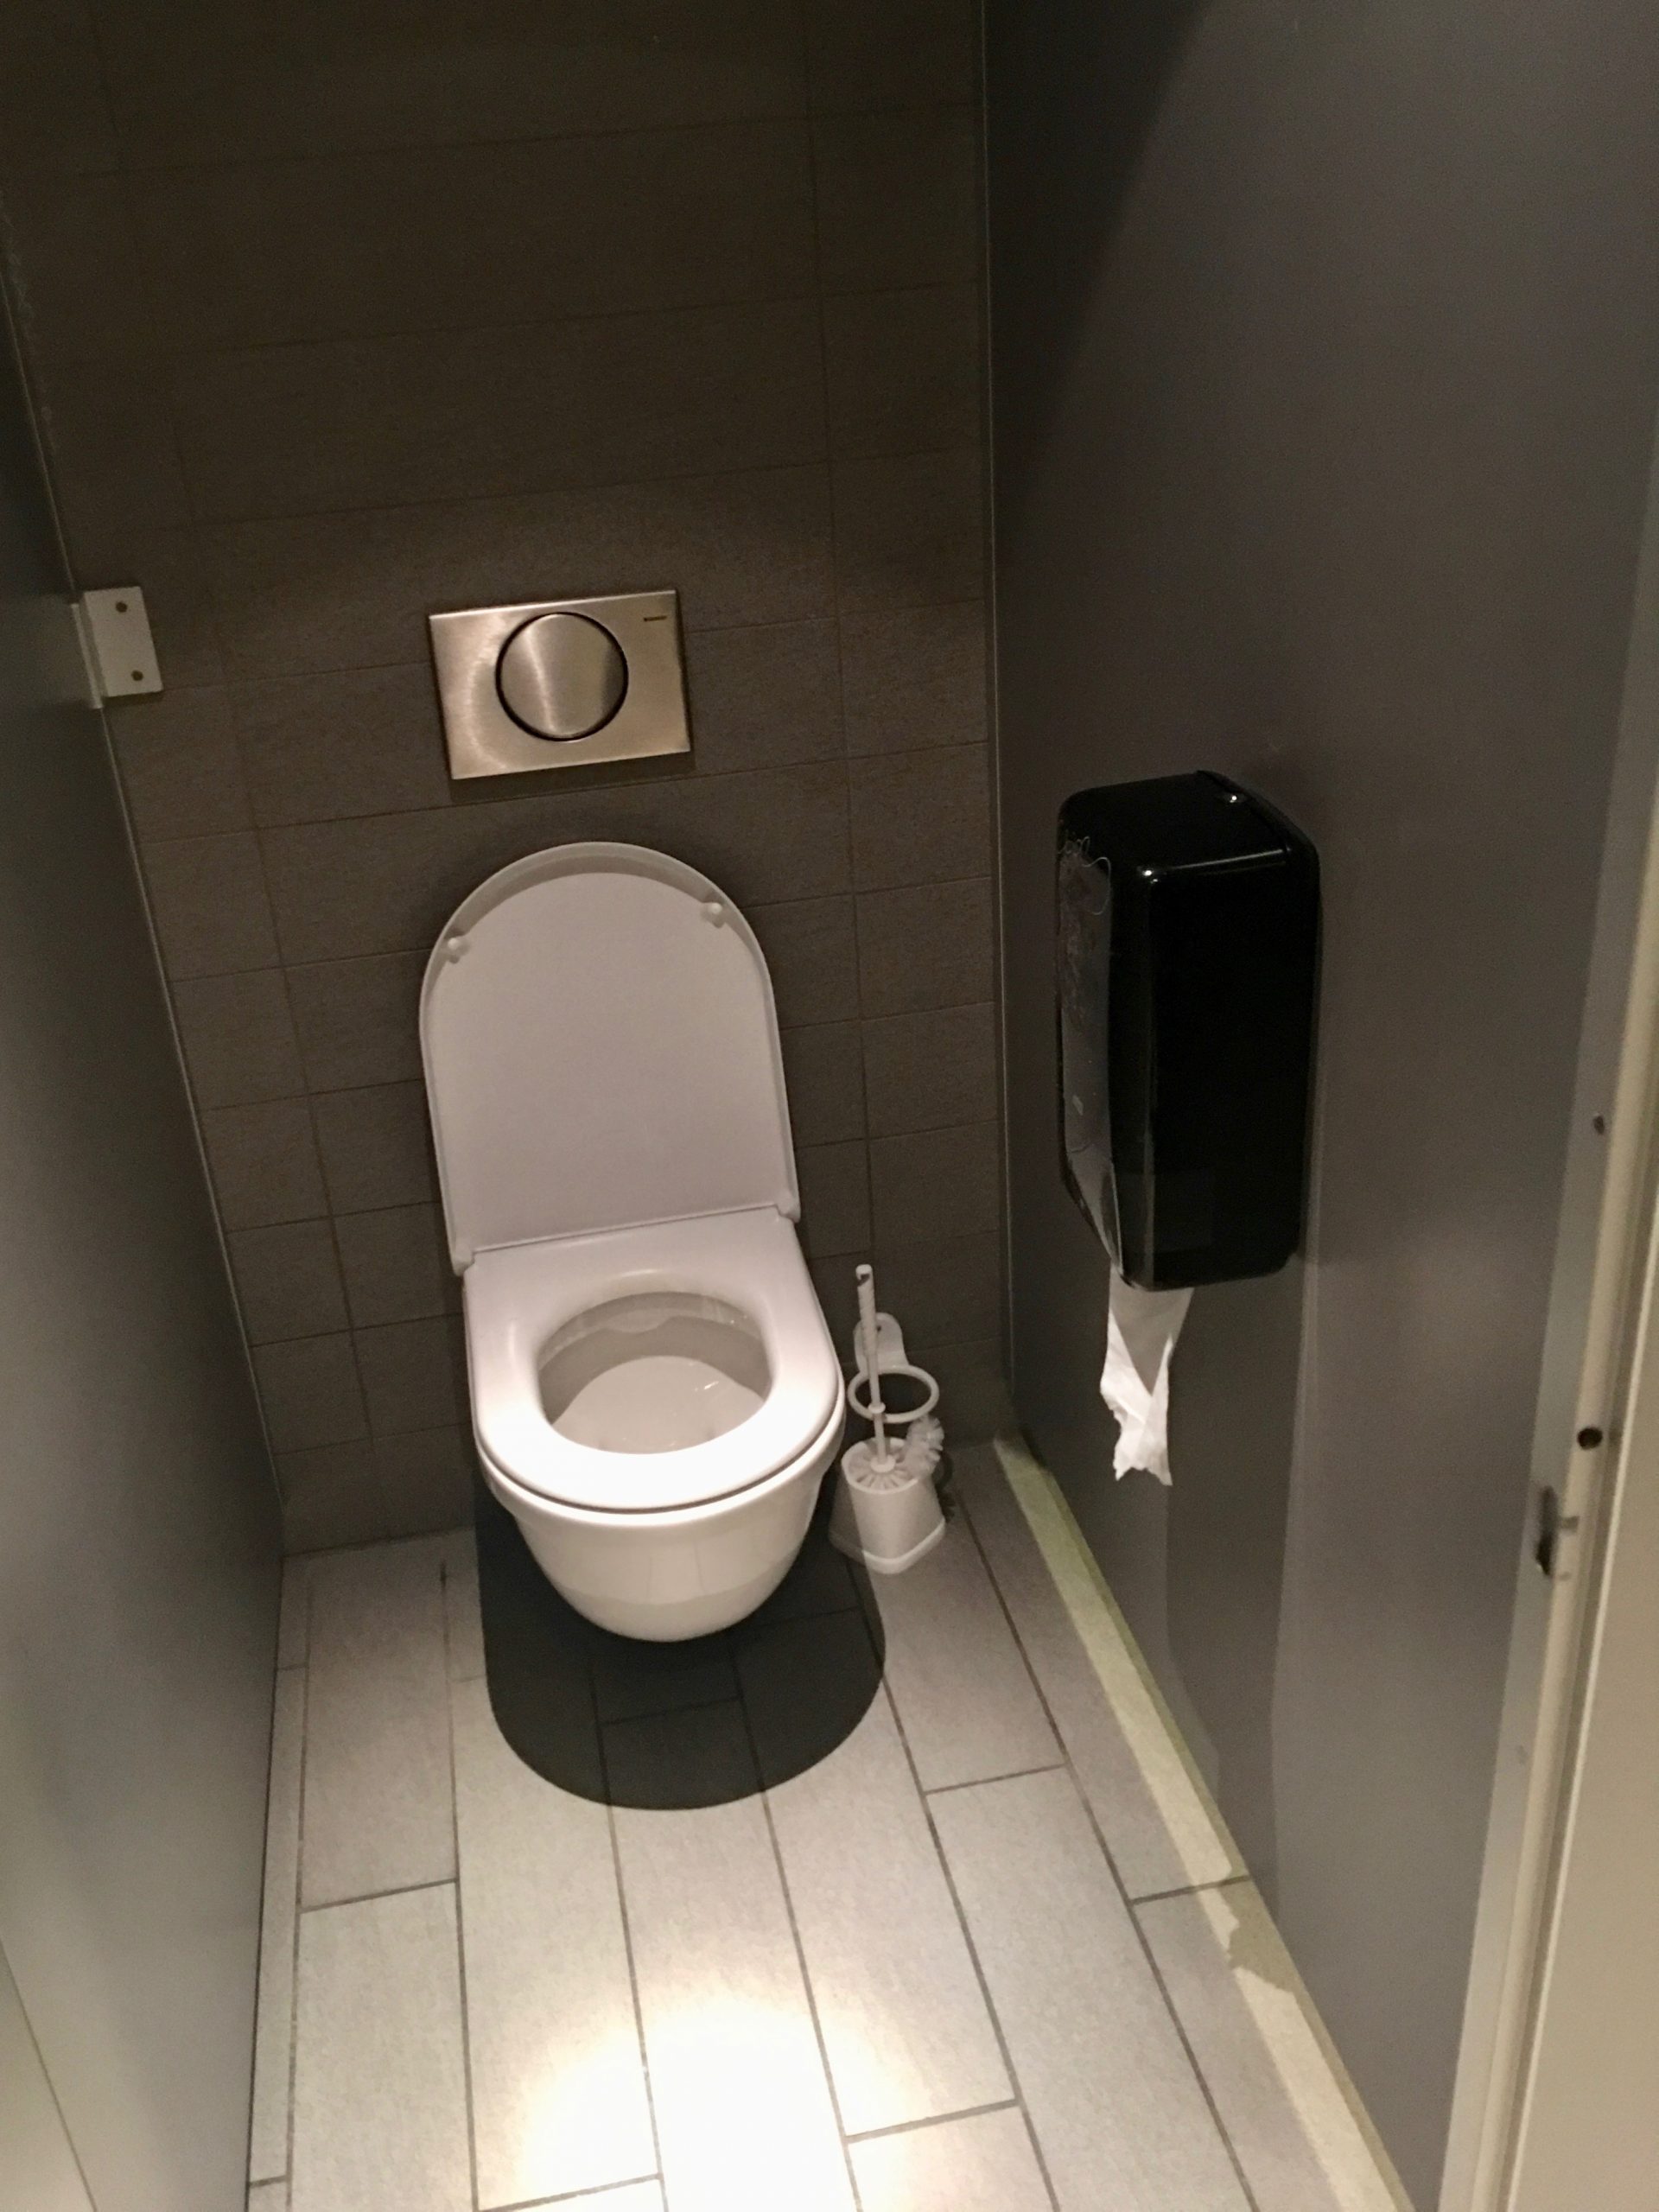 Filepublic Male Toilet At Trondheim Airport Vrnes Norway pertaining to sizing 2840 X 3786